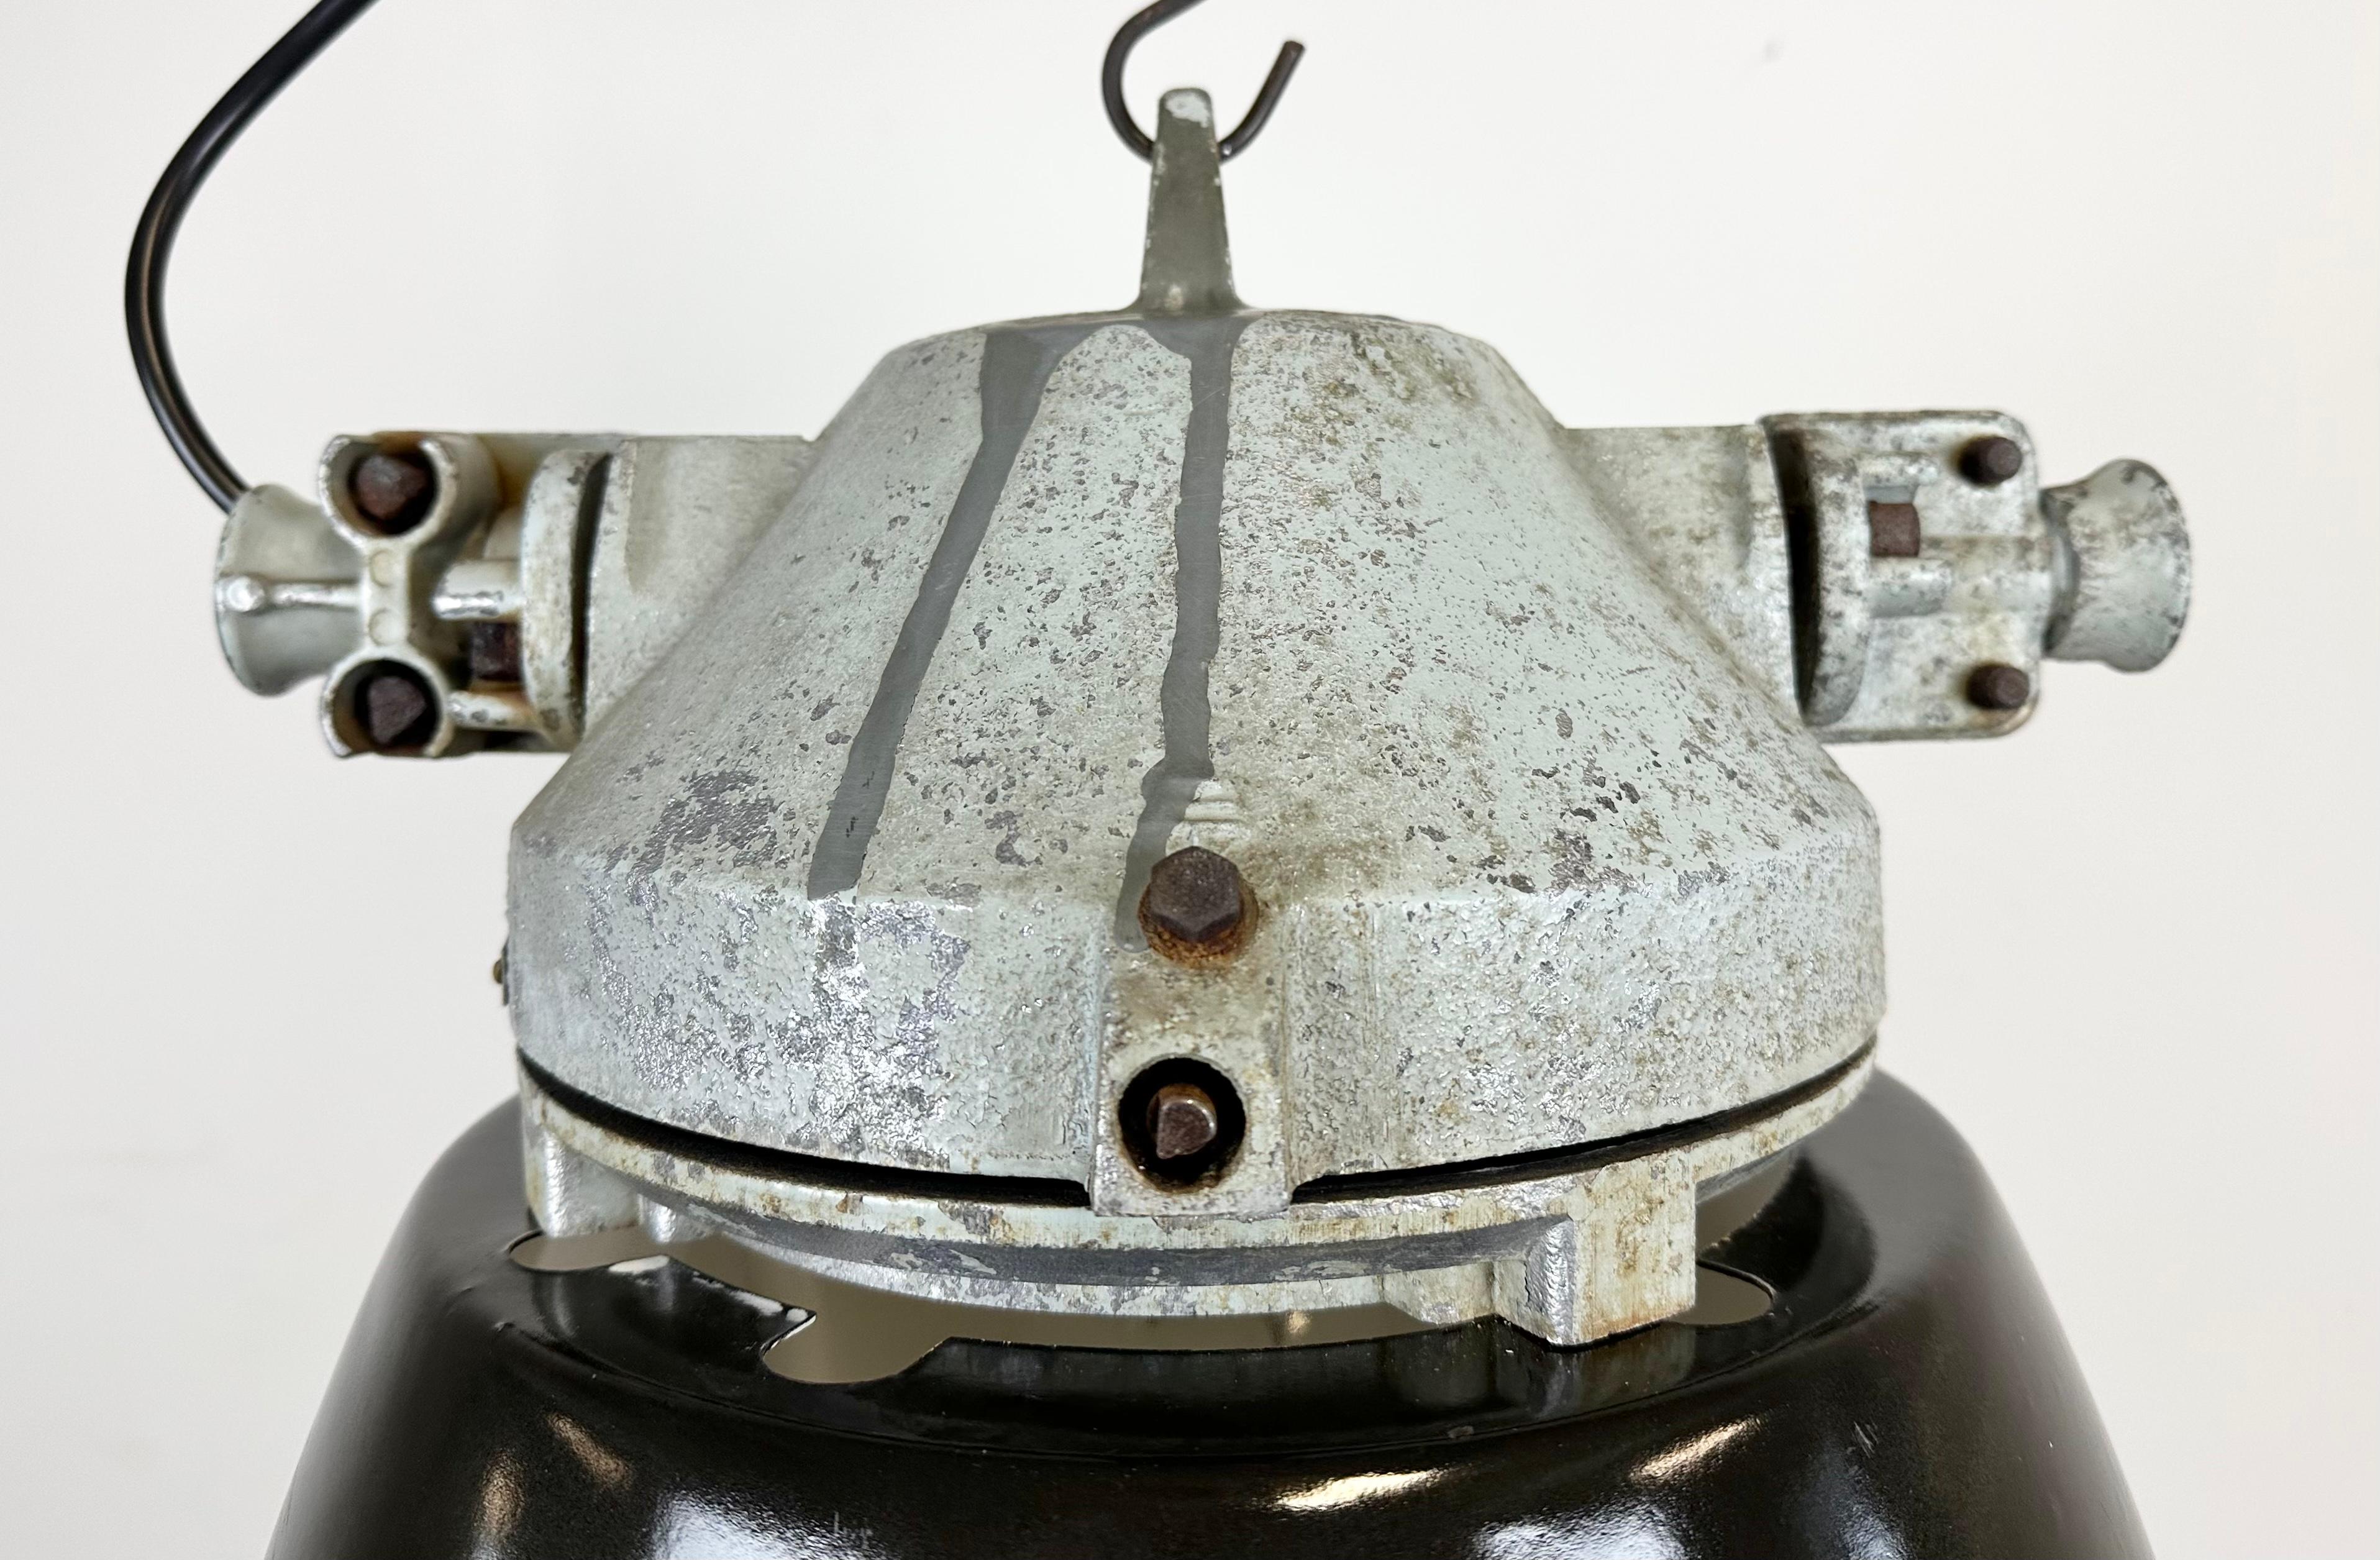 Industrial Grey Explosion Proof Lamp with Black Enameled Shade, 1970s In Good Condition For Sale In Kojetice, CZ